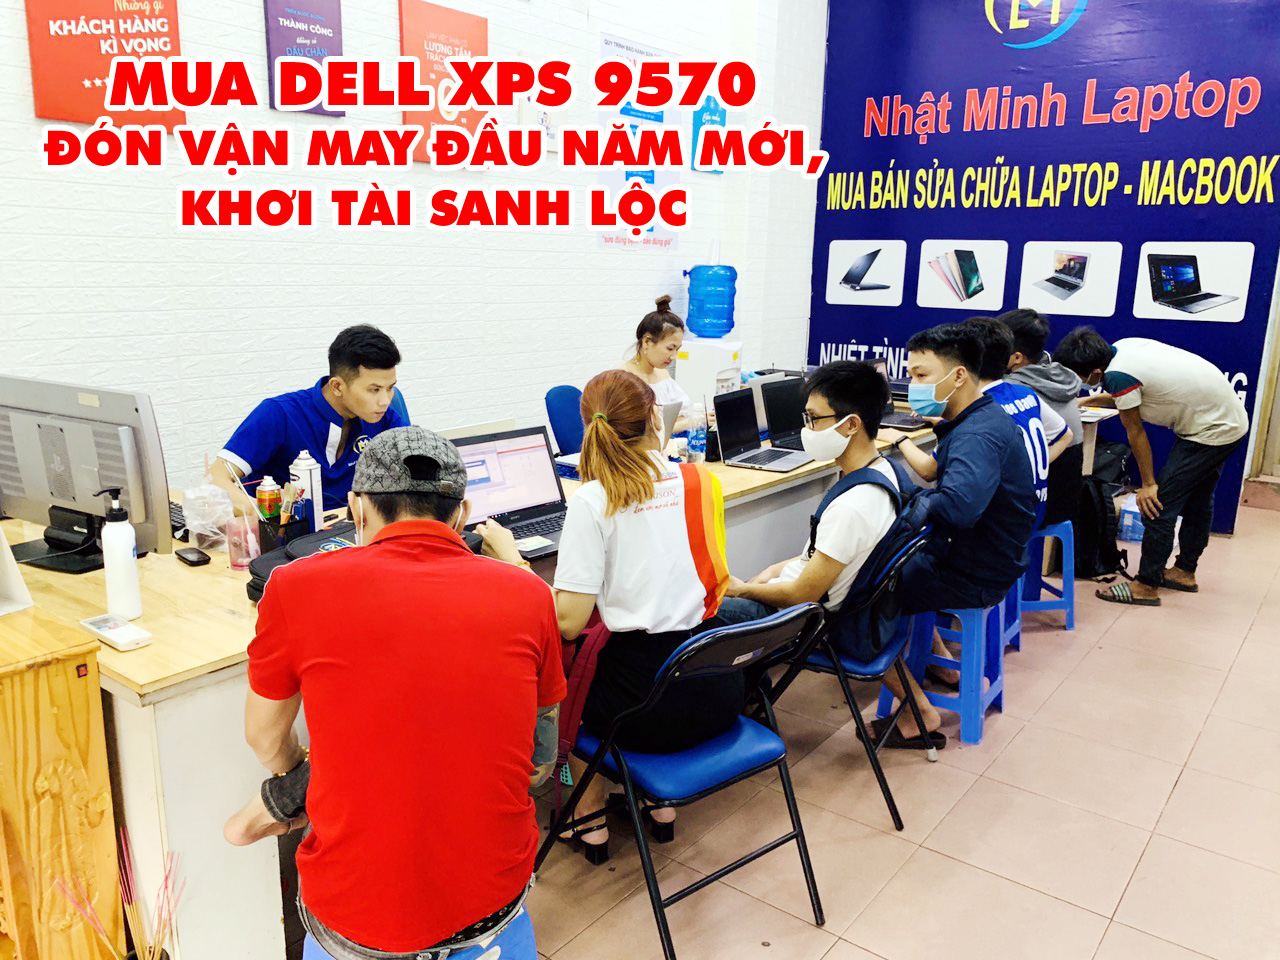 DEll XPS 9570